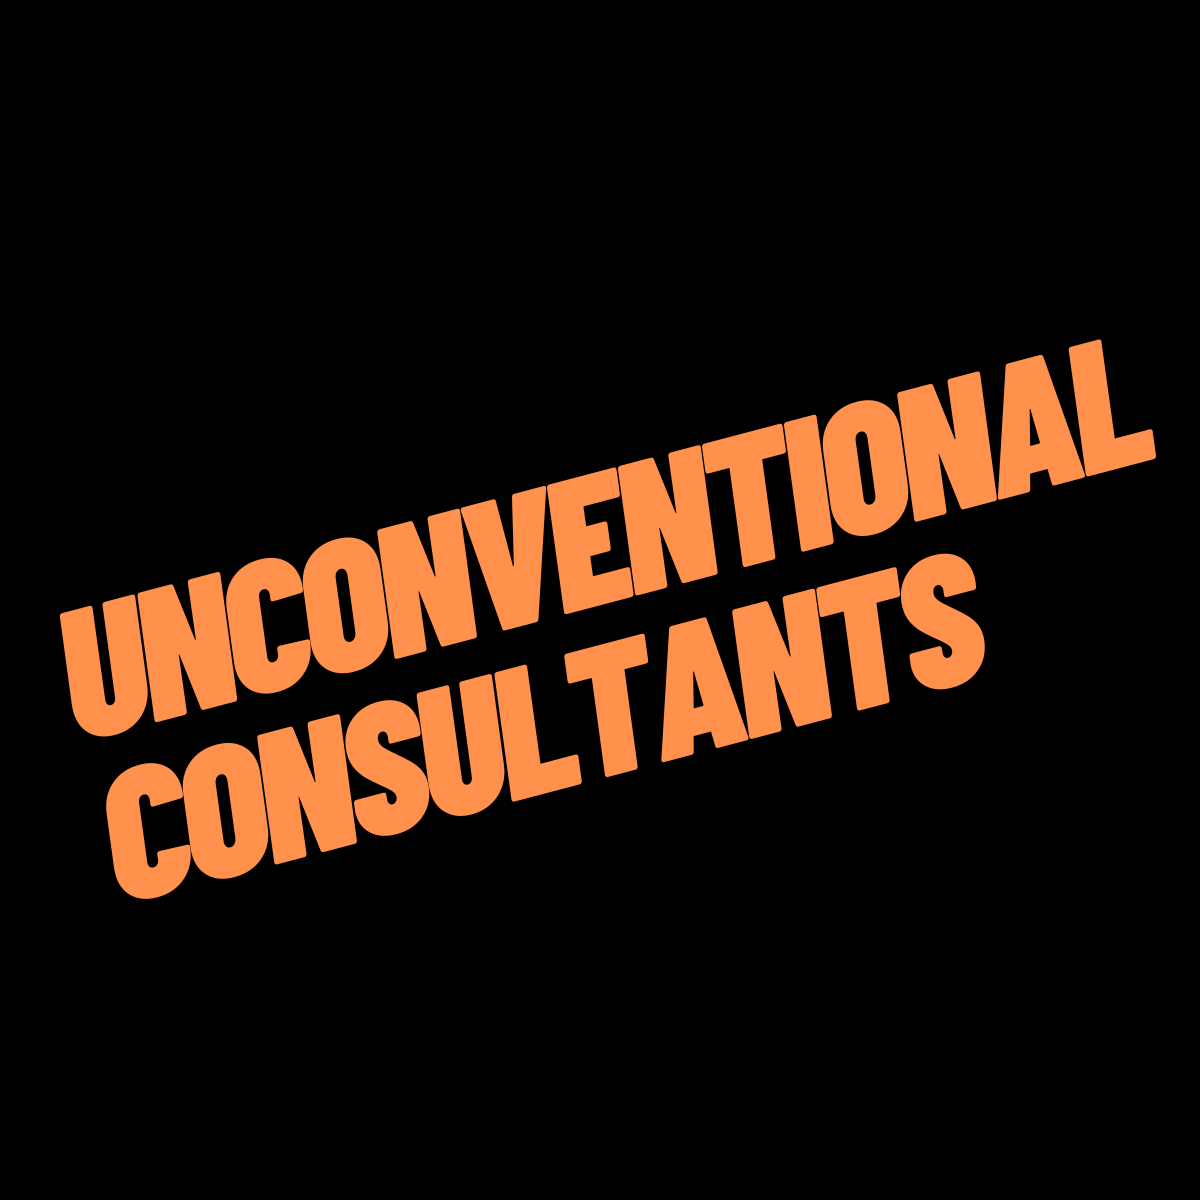 THE UNCONVENTIONAL CONSULTANTS